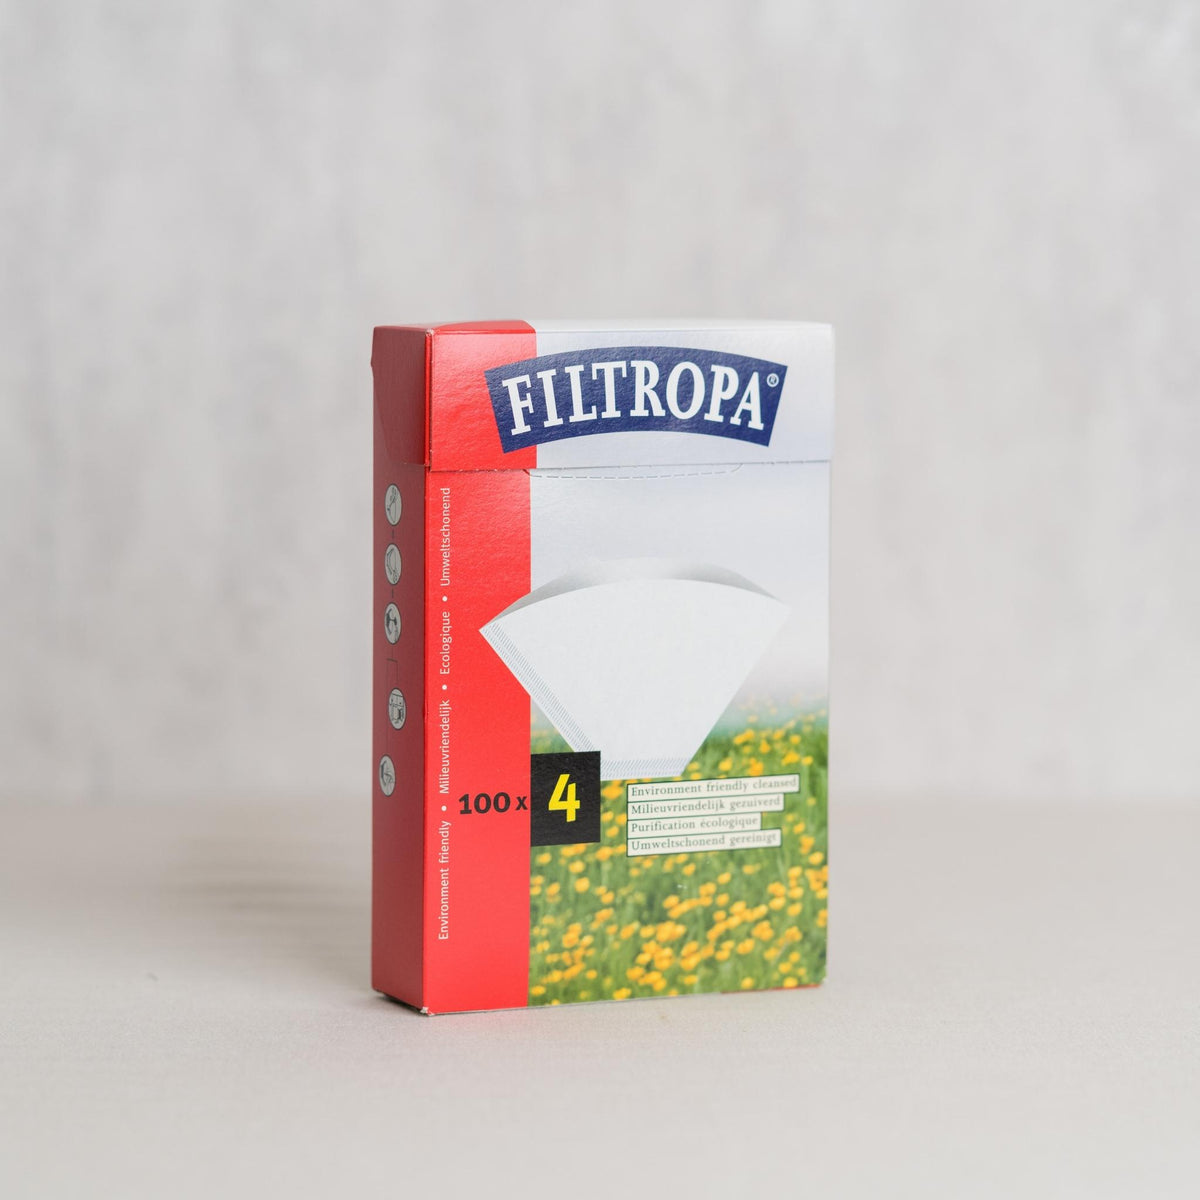 Filtropa White Size 4 Filter Papers (100)